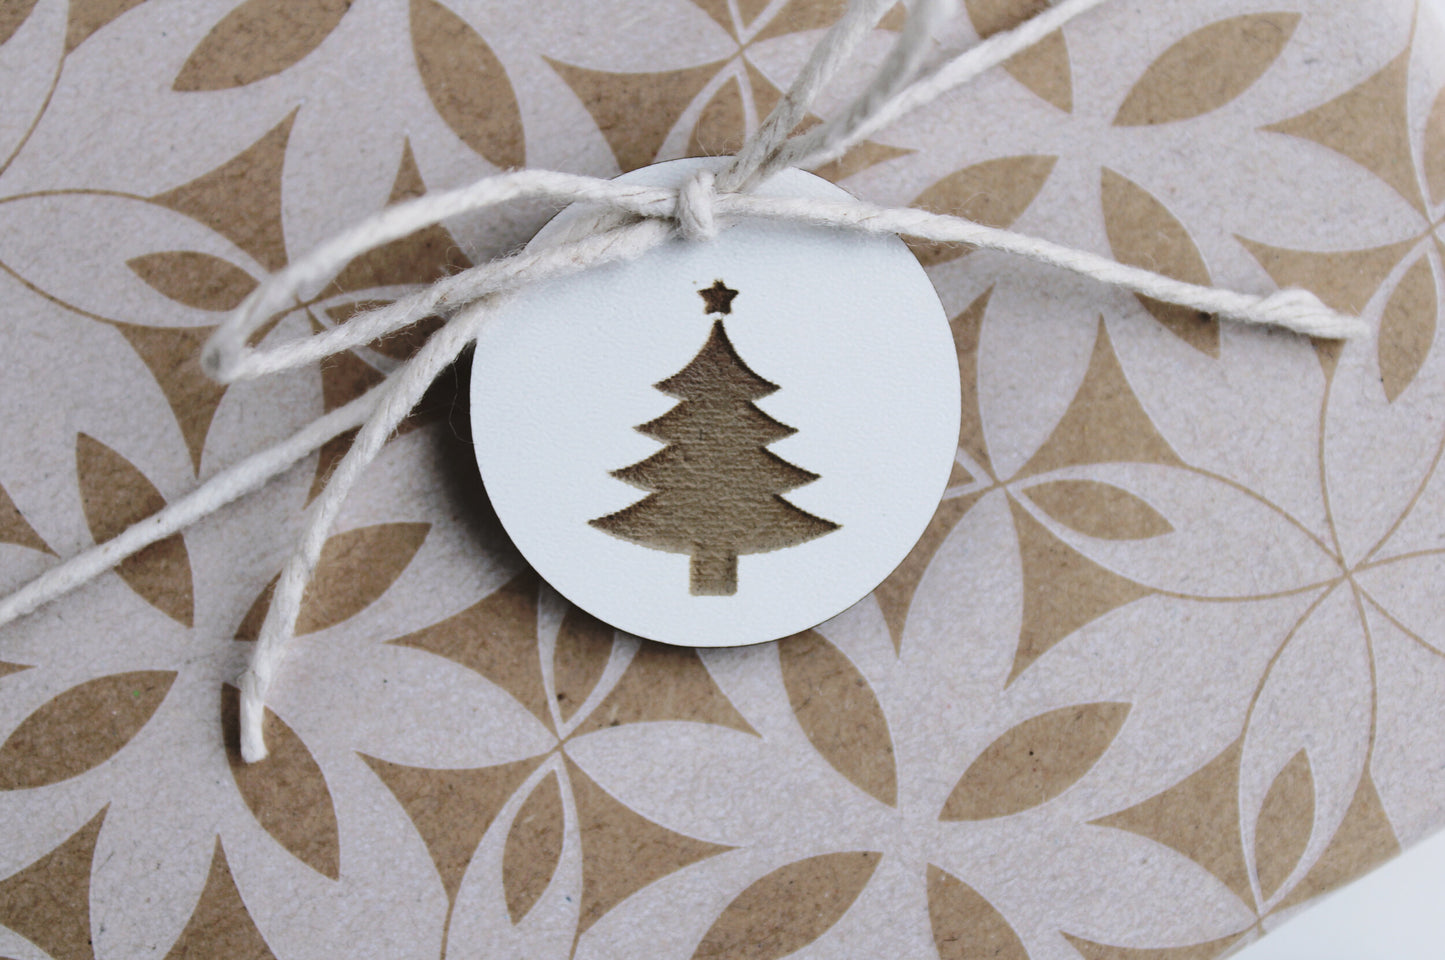 20 Christmas tree gift tags in white